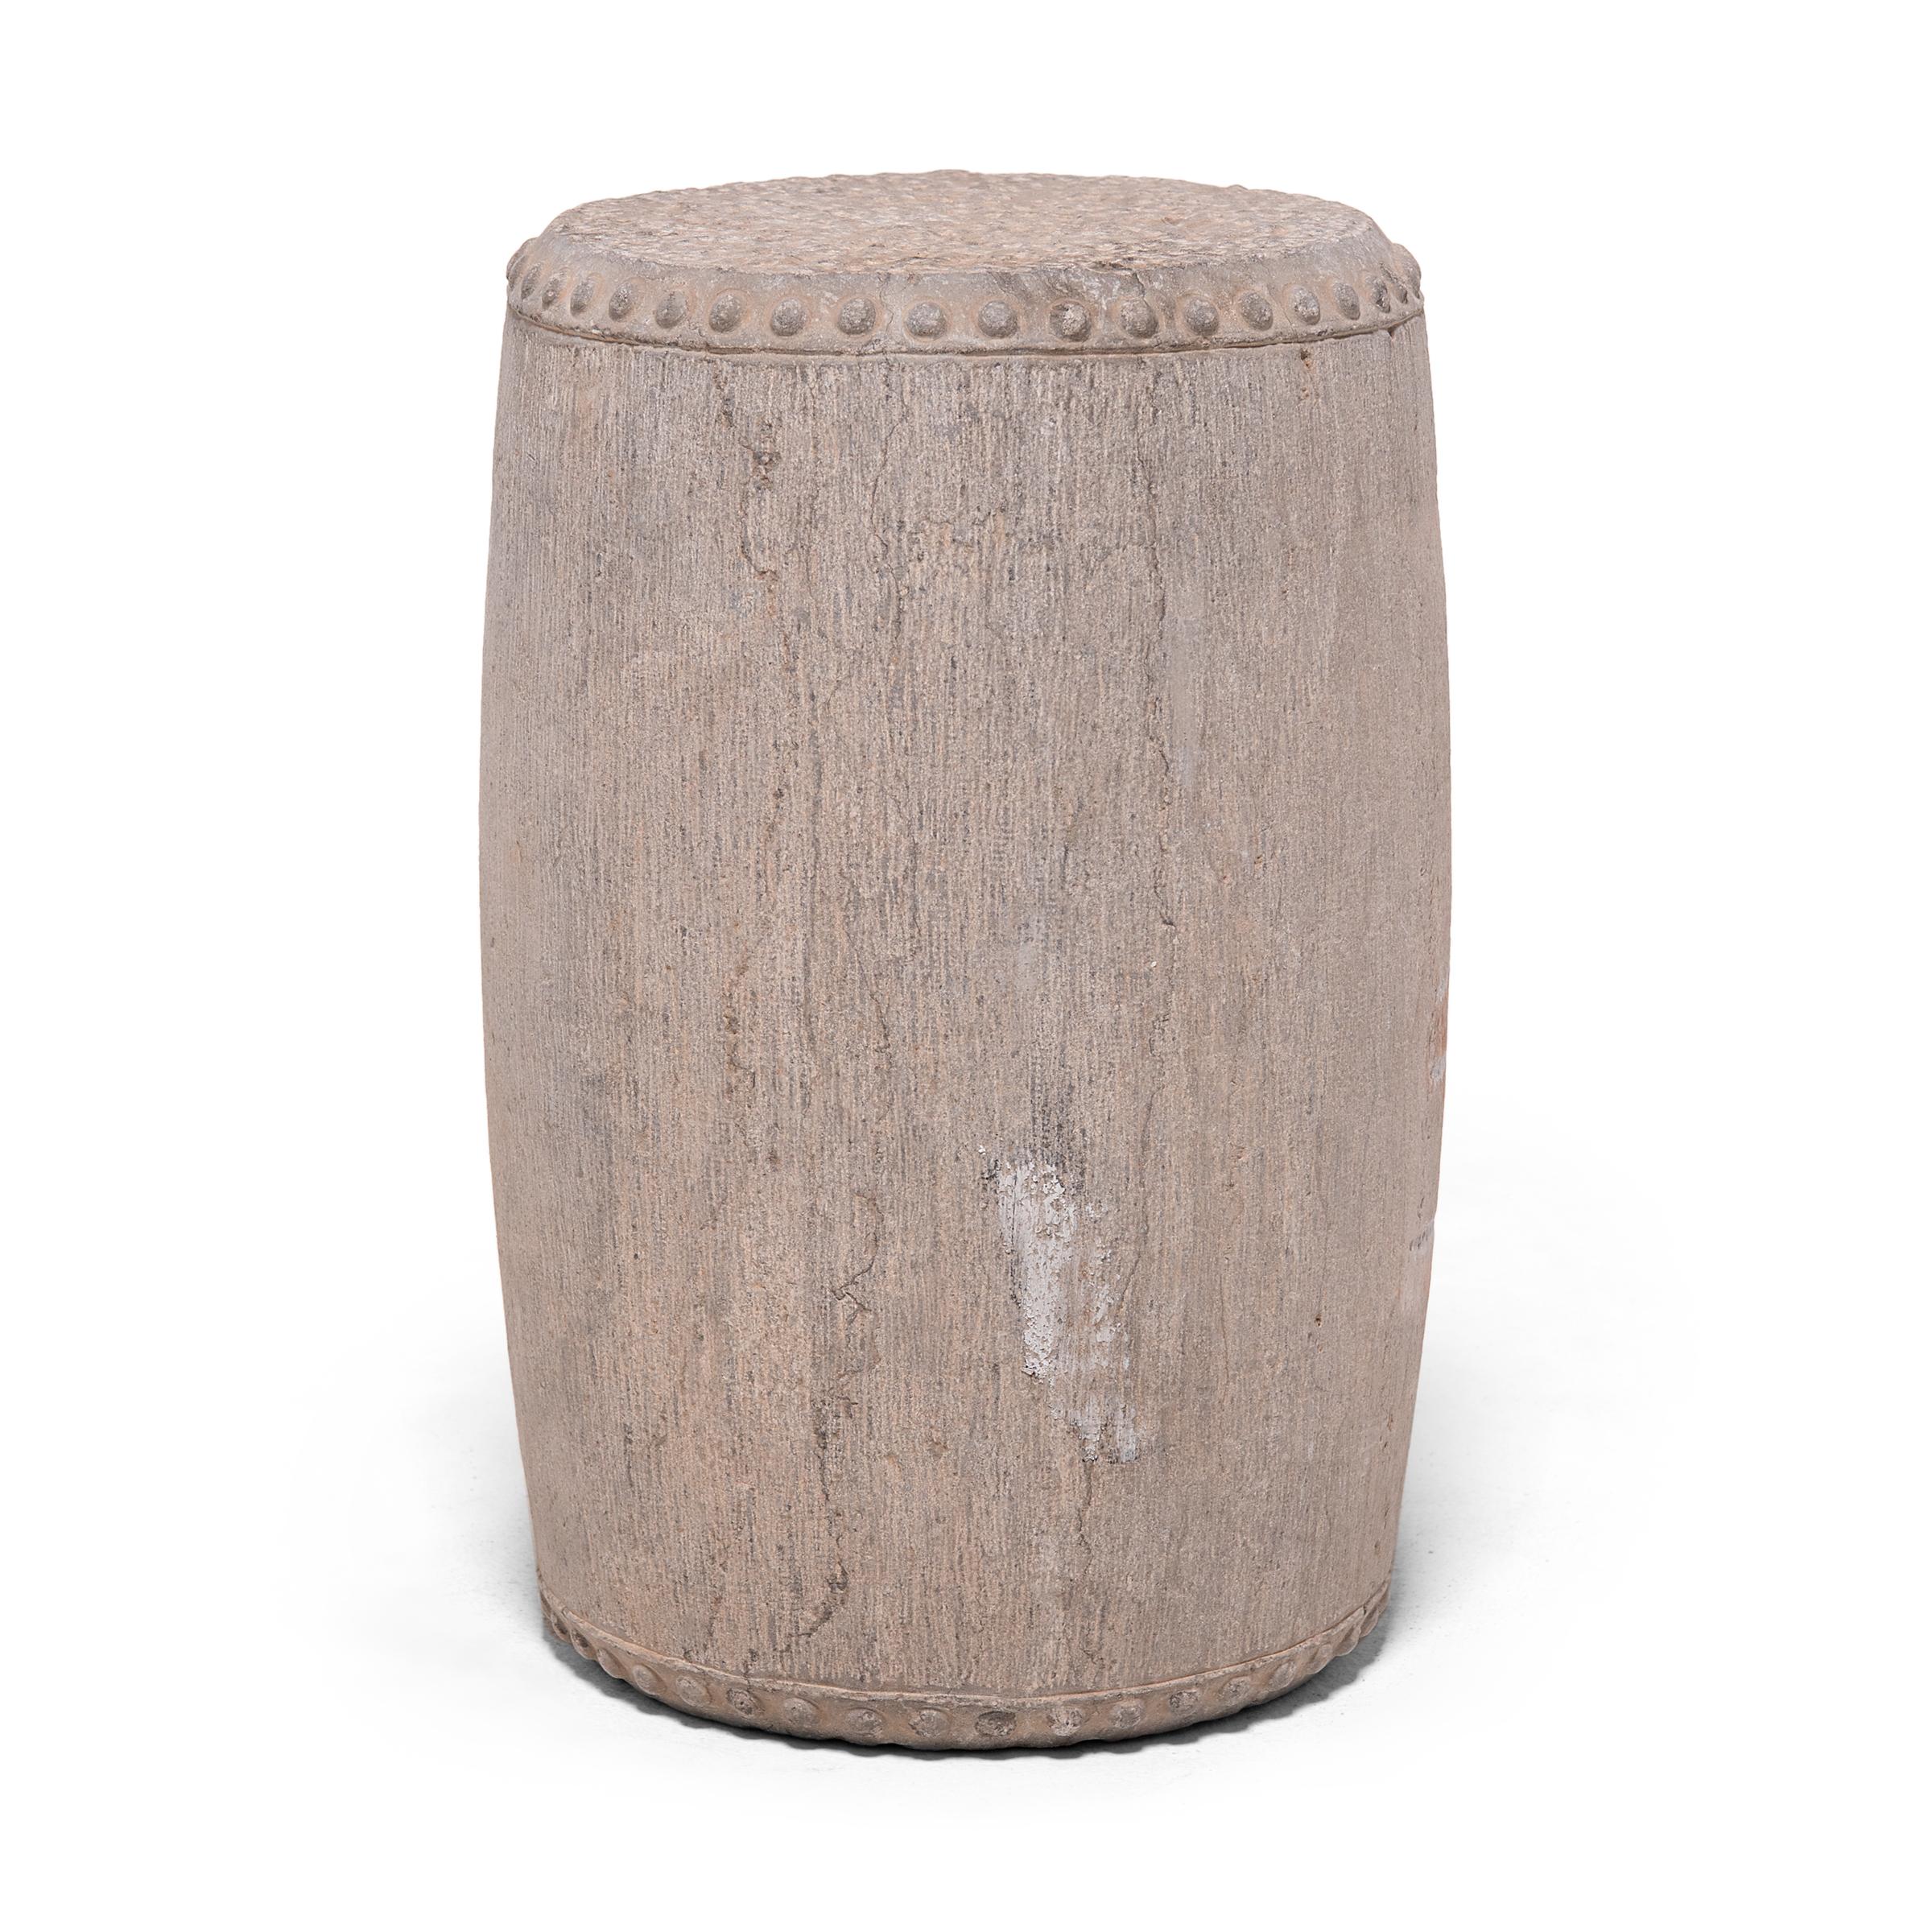 This elegant garden stool was carved from a solid block of limestone by artisans in the Shanxi region of China. Drum-form stools such as this were traditionally used in gardens and outdoor pavilions where upper class scholars read, wrote, discussed